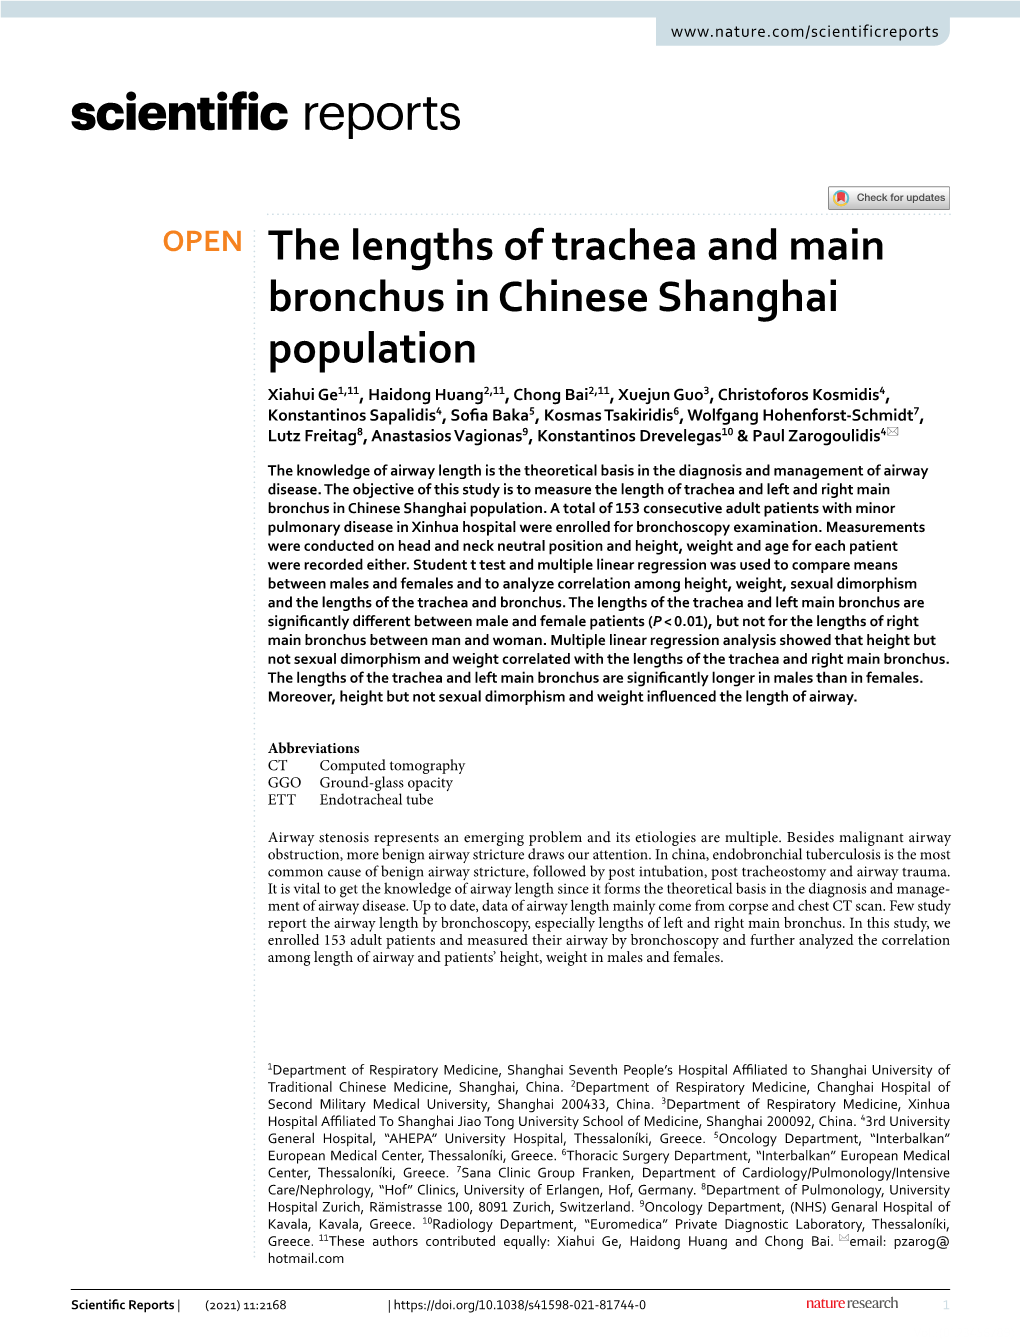 The Lengths of Trachea and Main Bronchus in Chinese Shanghai